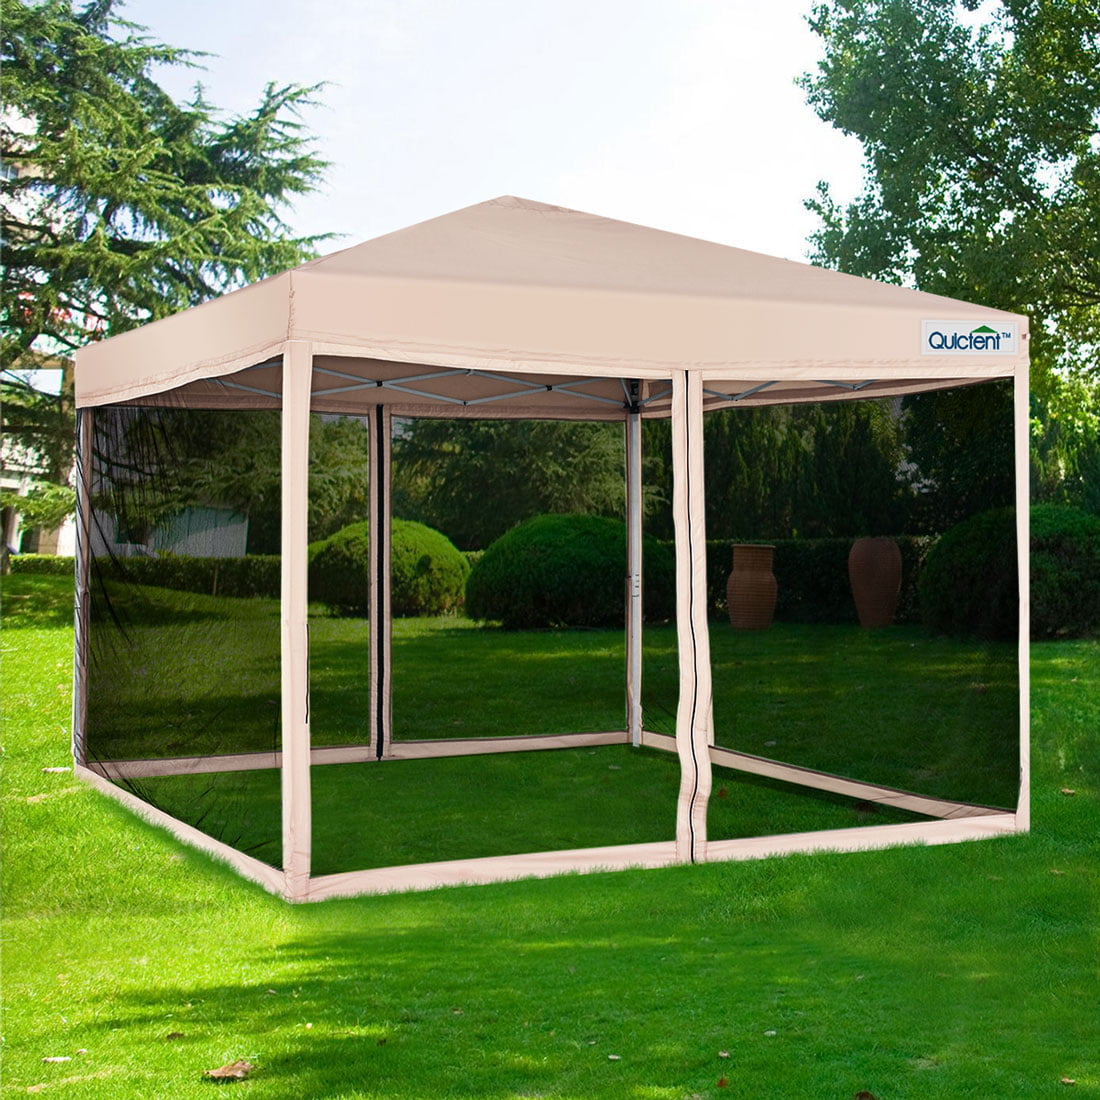 Cabin Style OutdoorCanopy Gazebo  11' x 11' with Netting and Adjustable Side